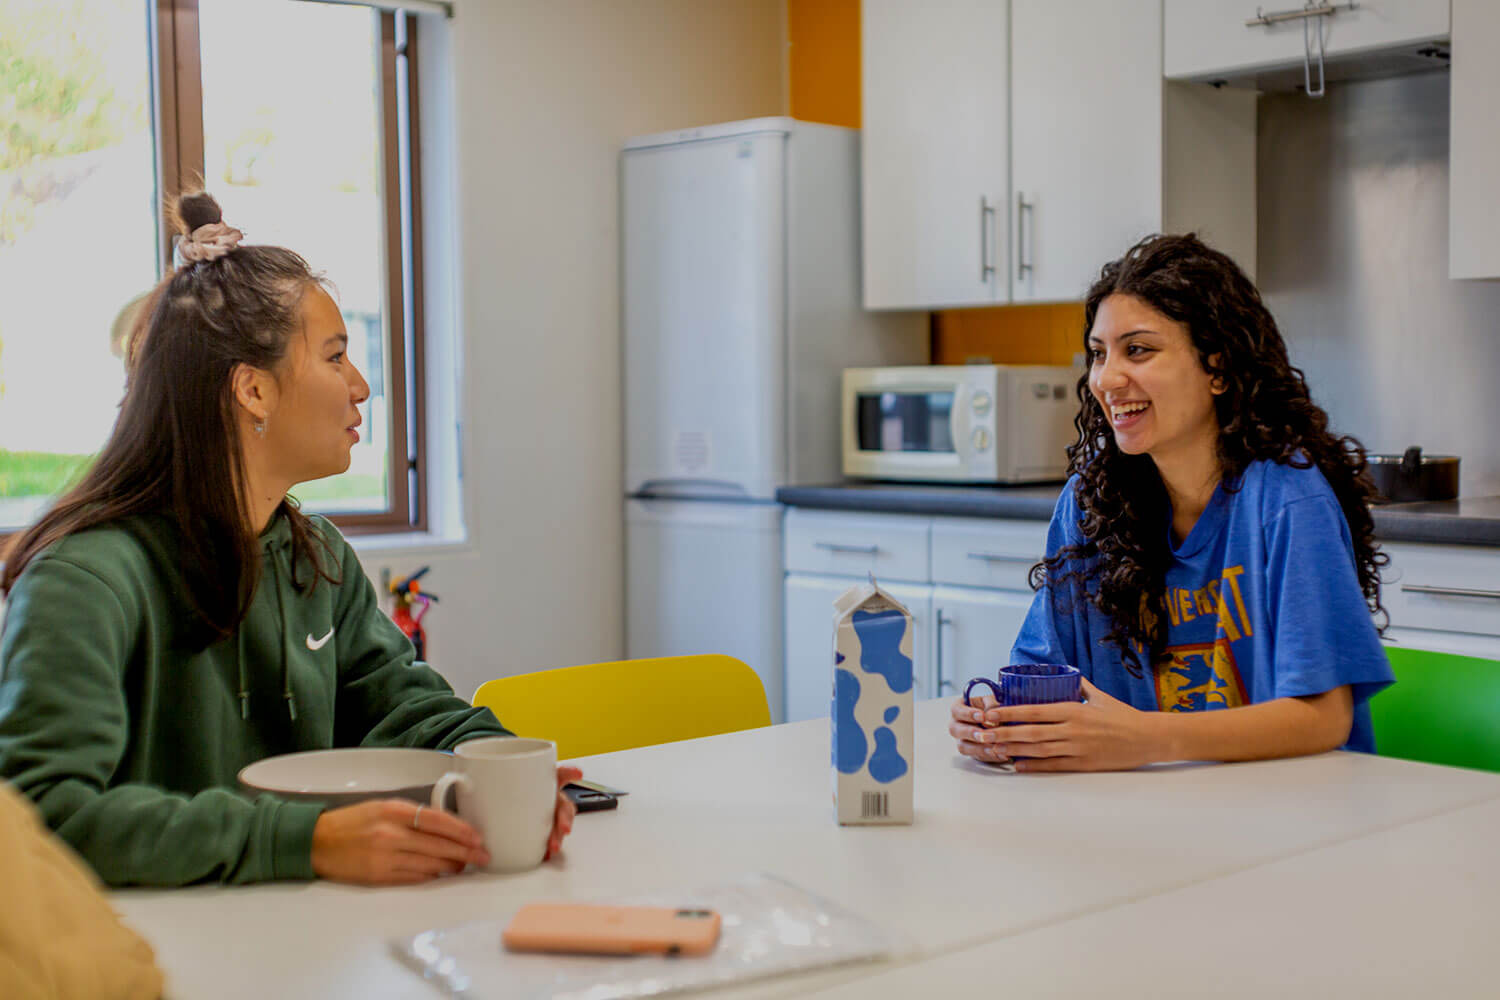 Two students in their shared kitchen, chatting over a cup of tea